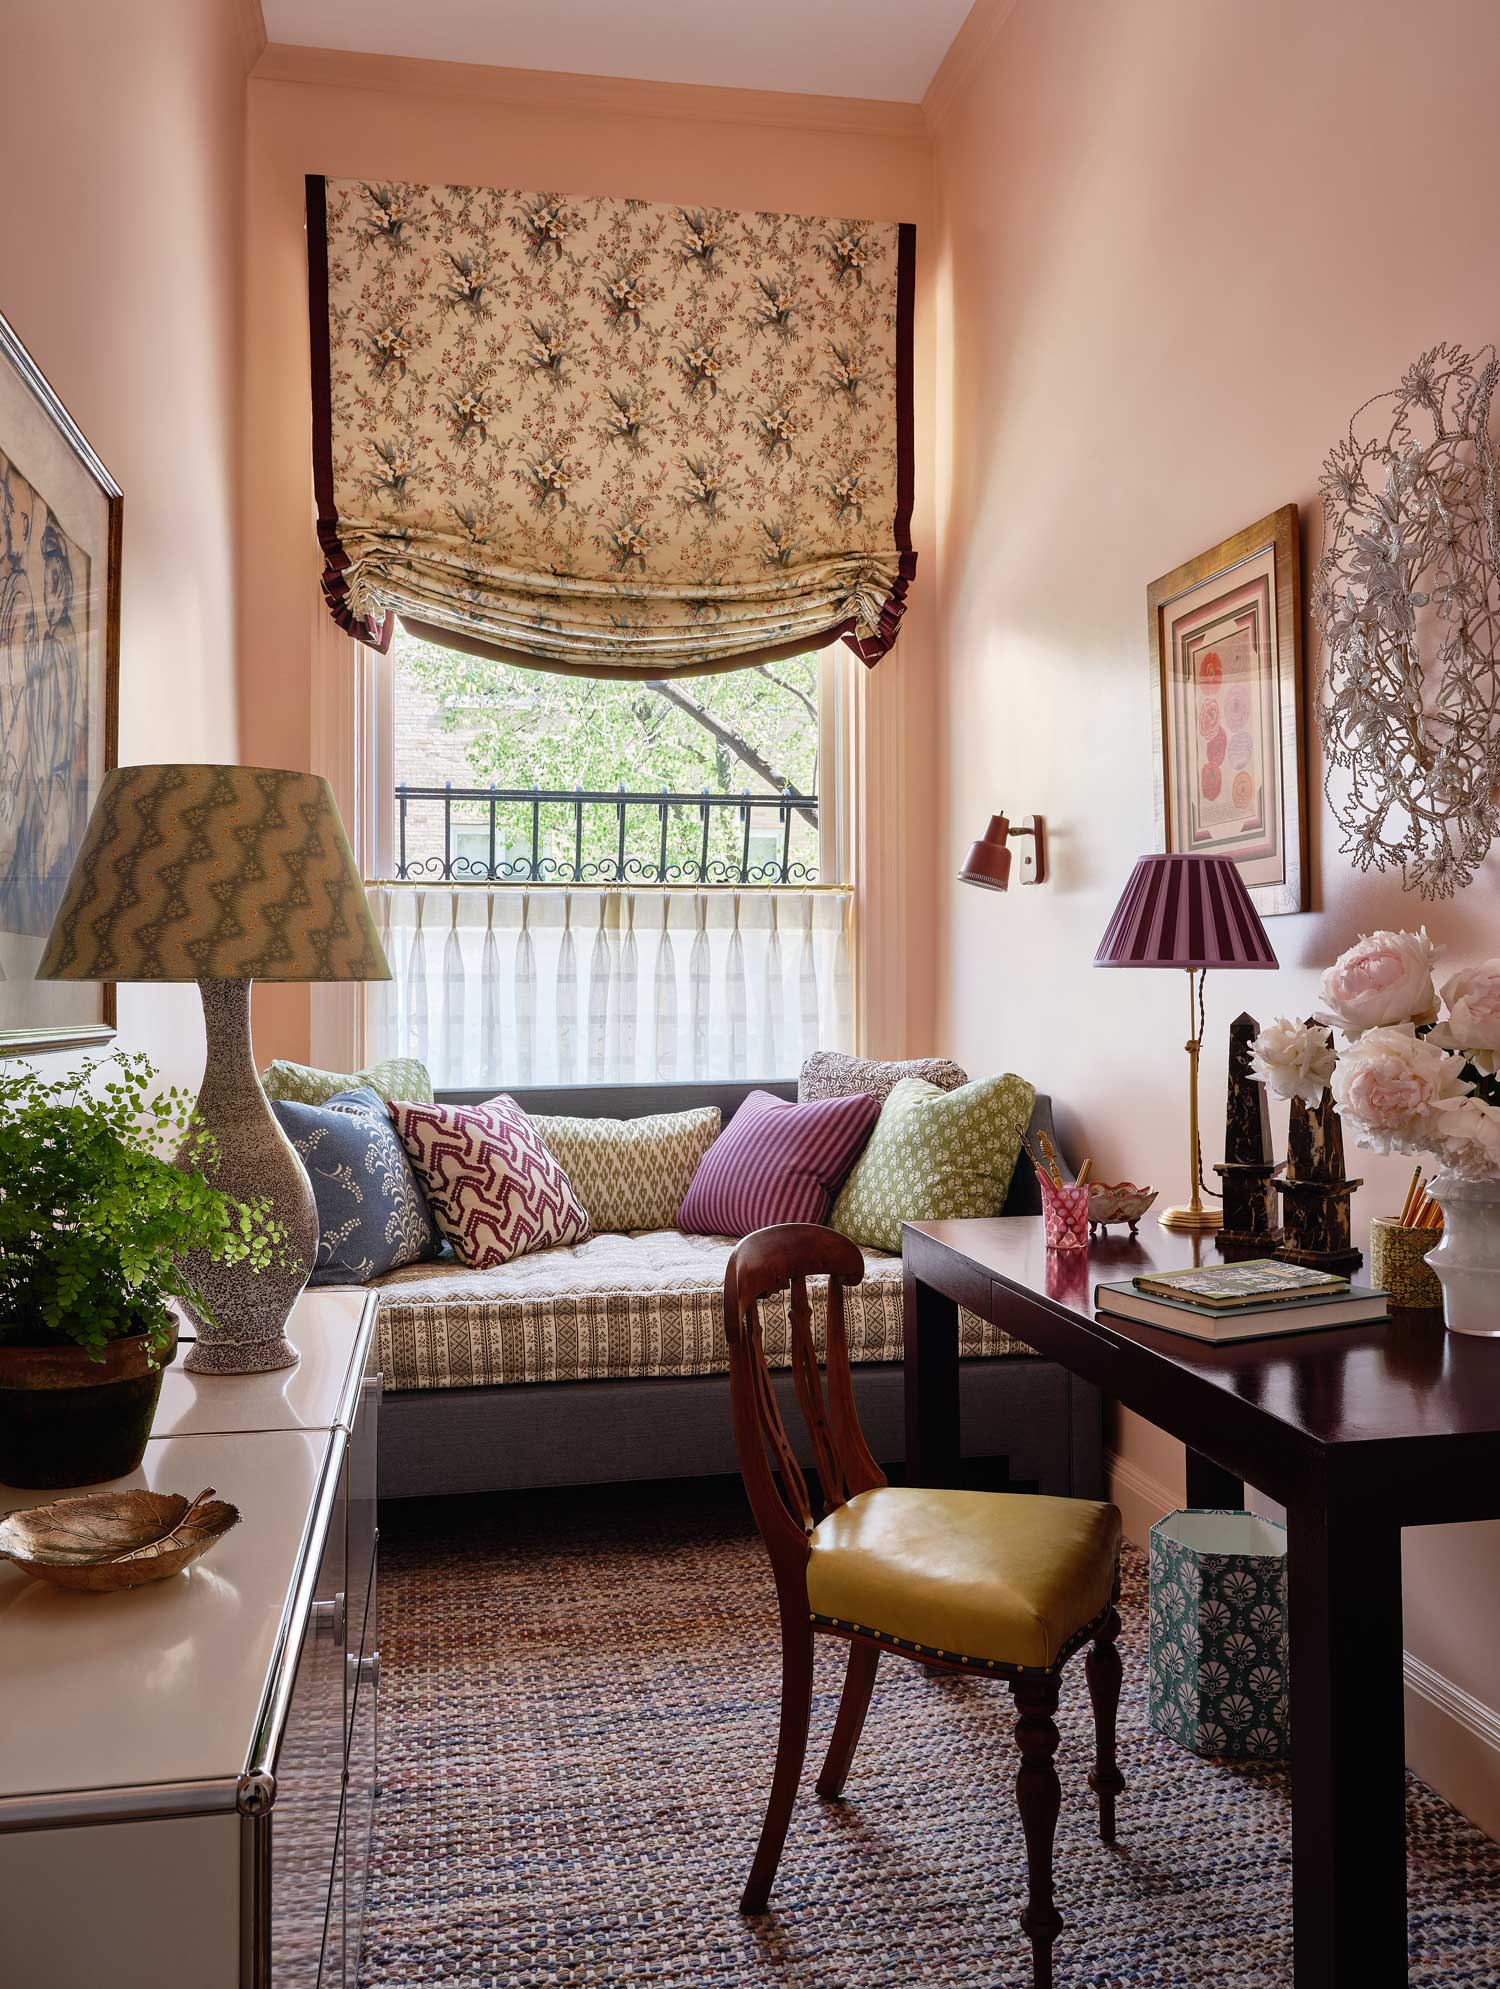 peach office with floral shades, lamps and daybed